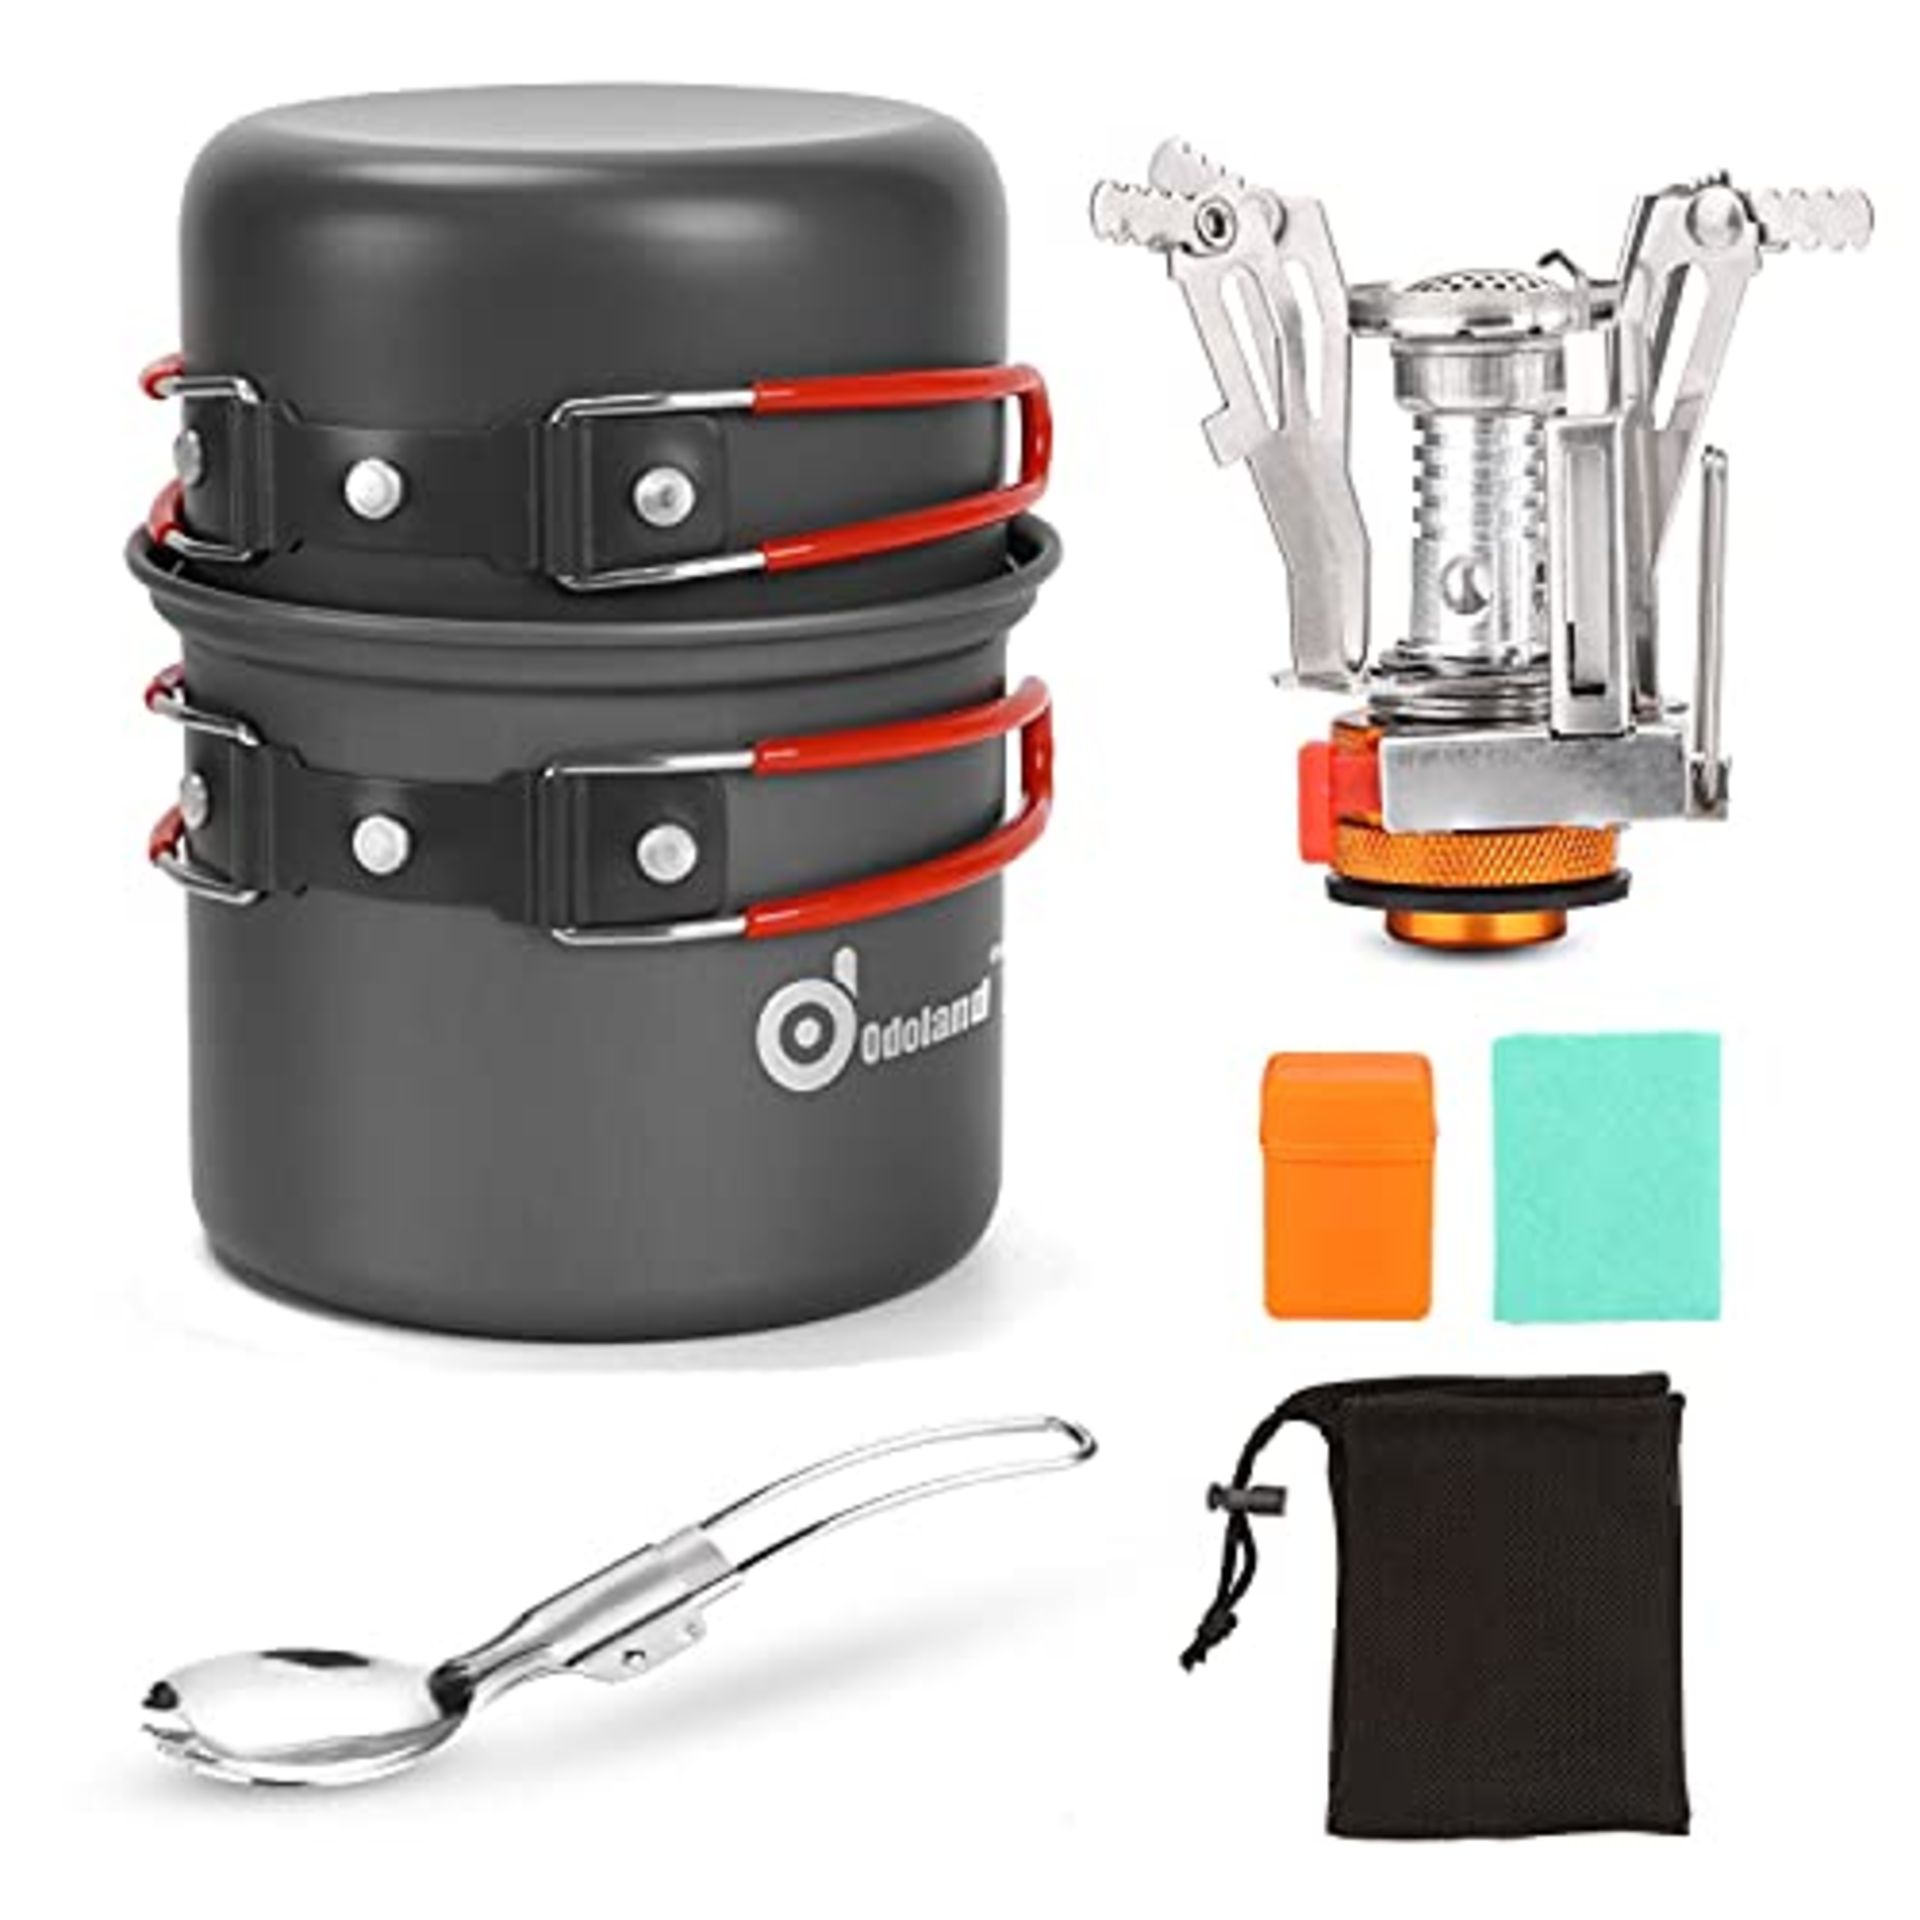 RRP £23.96 Odoland Camping Cookware Set With Stove for 1-2 People